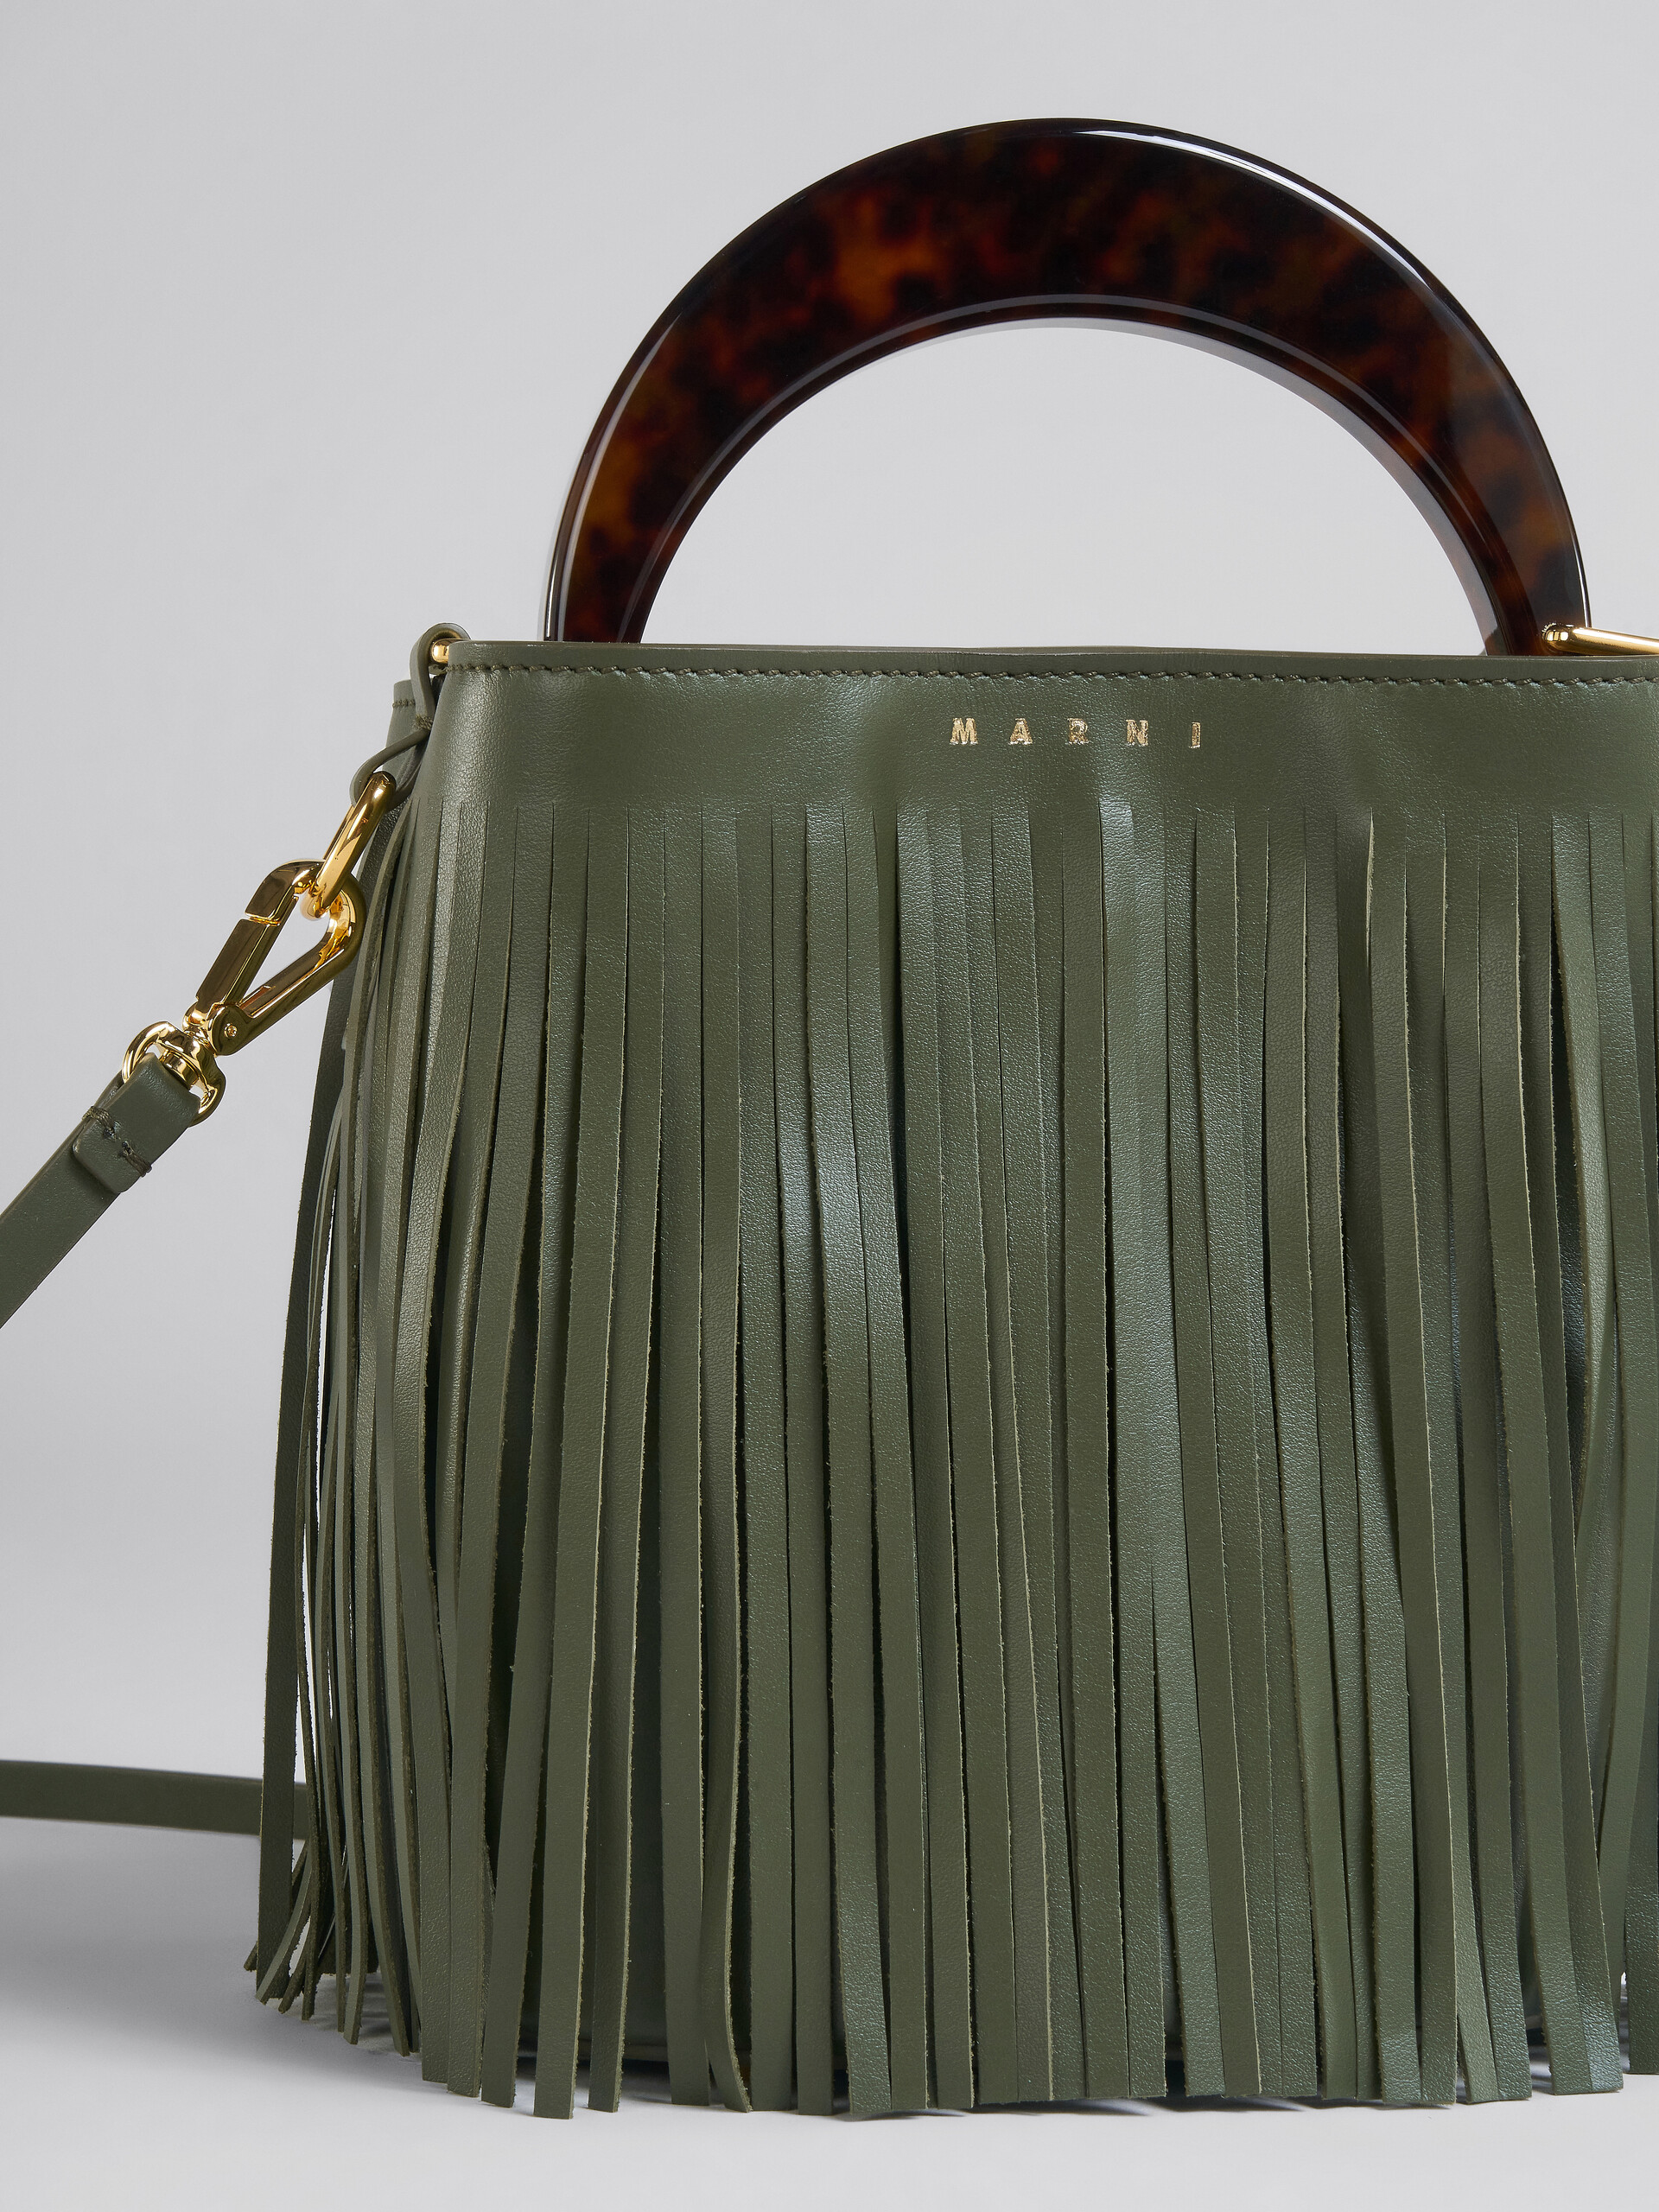 Venice Small Bucket in green leather with fringes - Shoulder Bag - Image 5